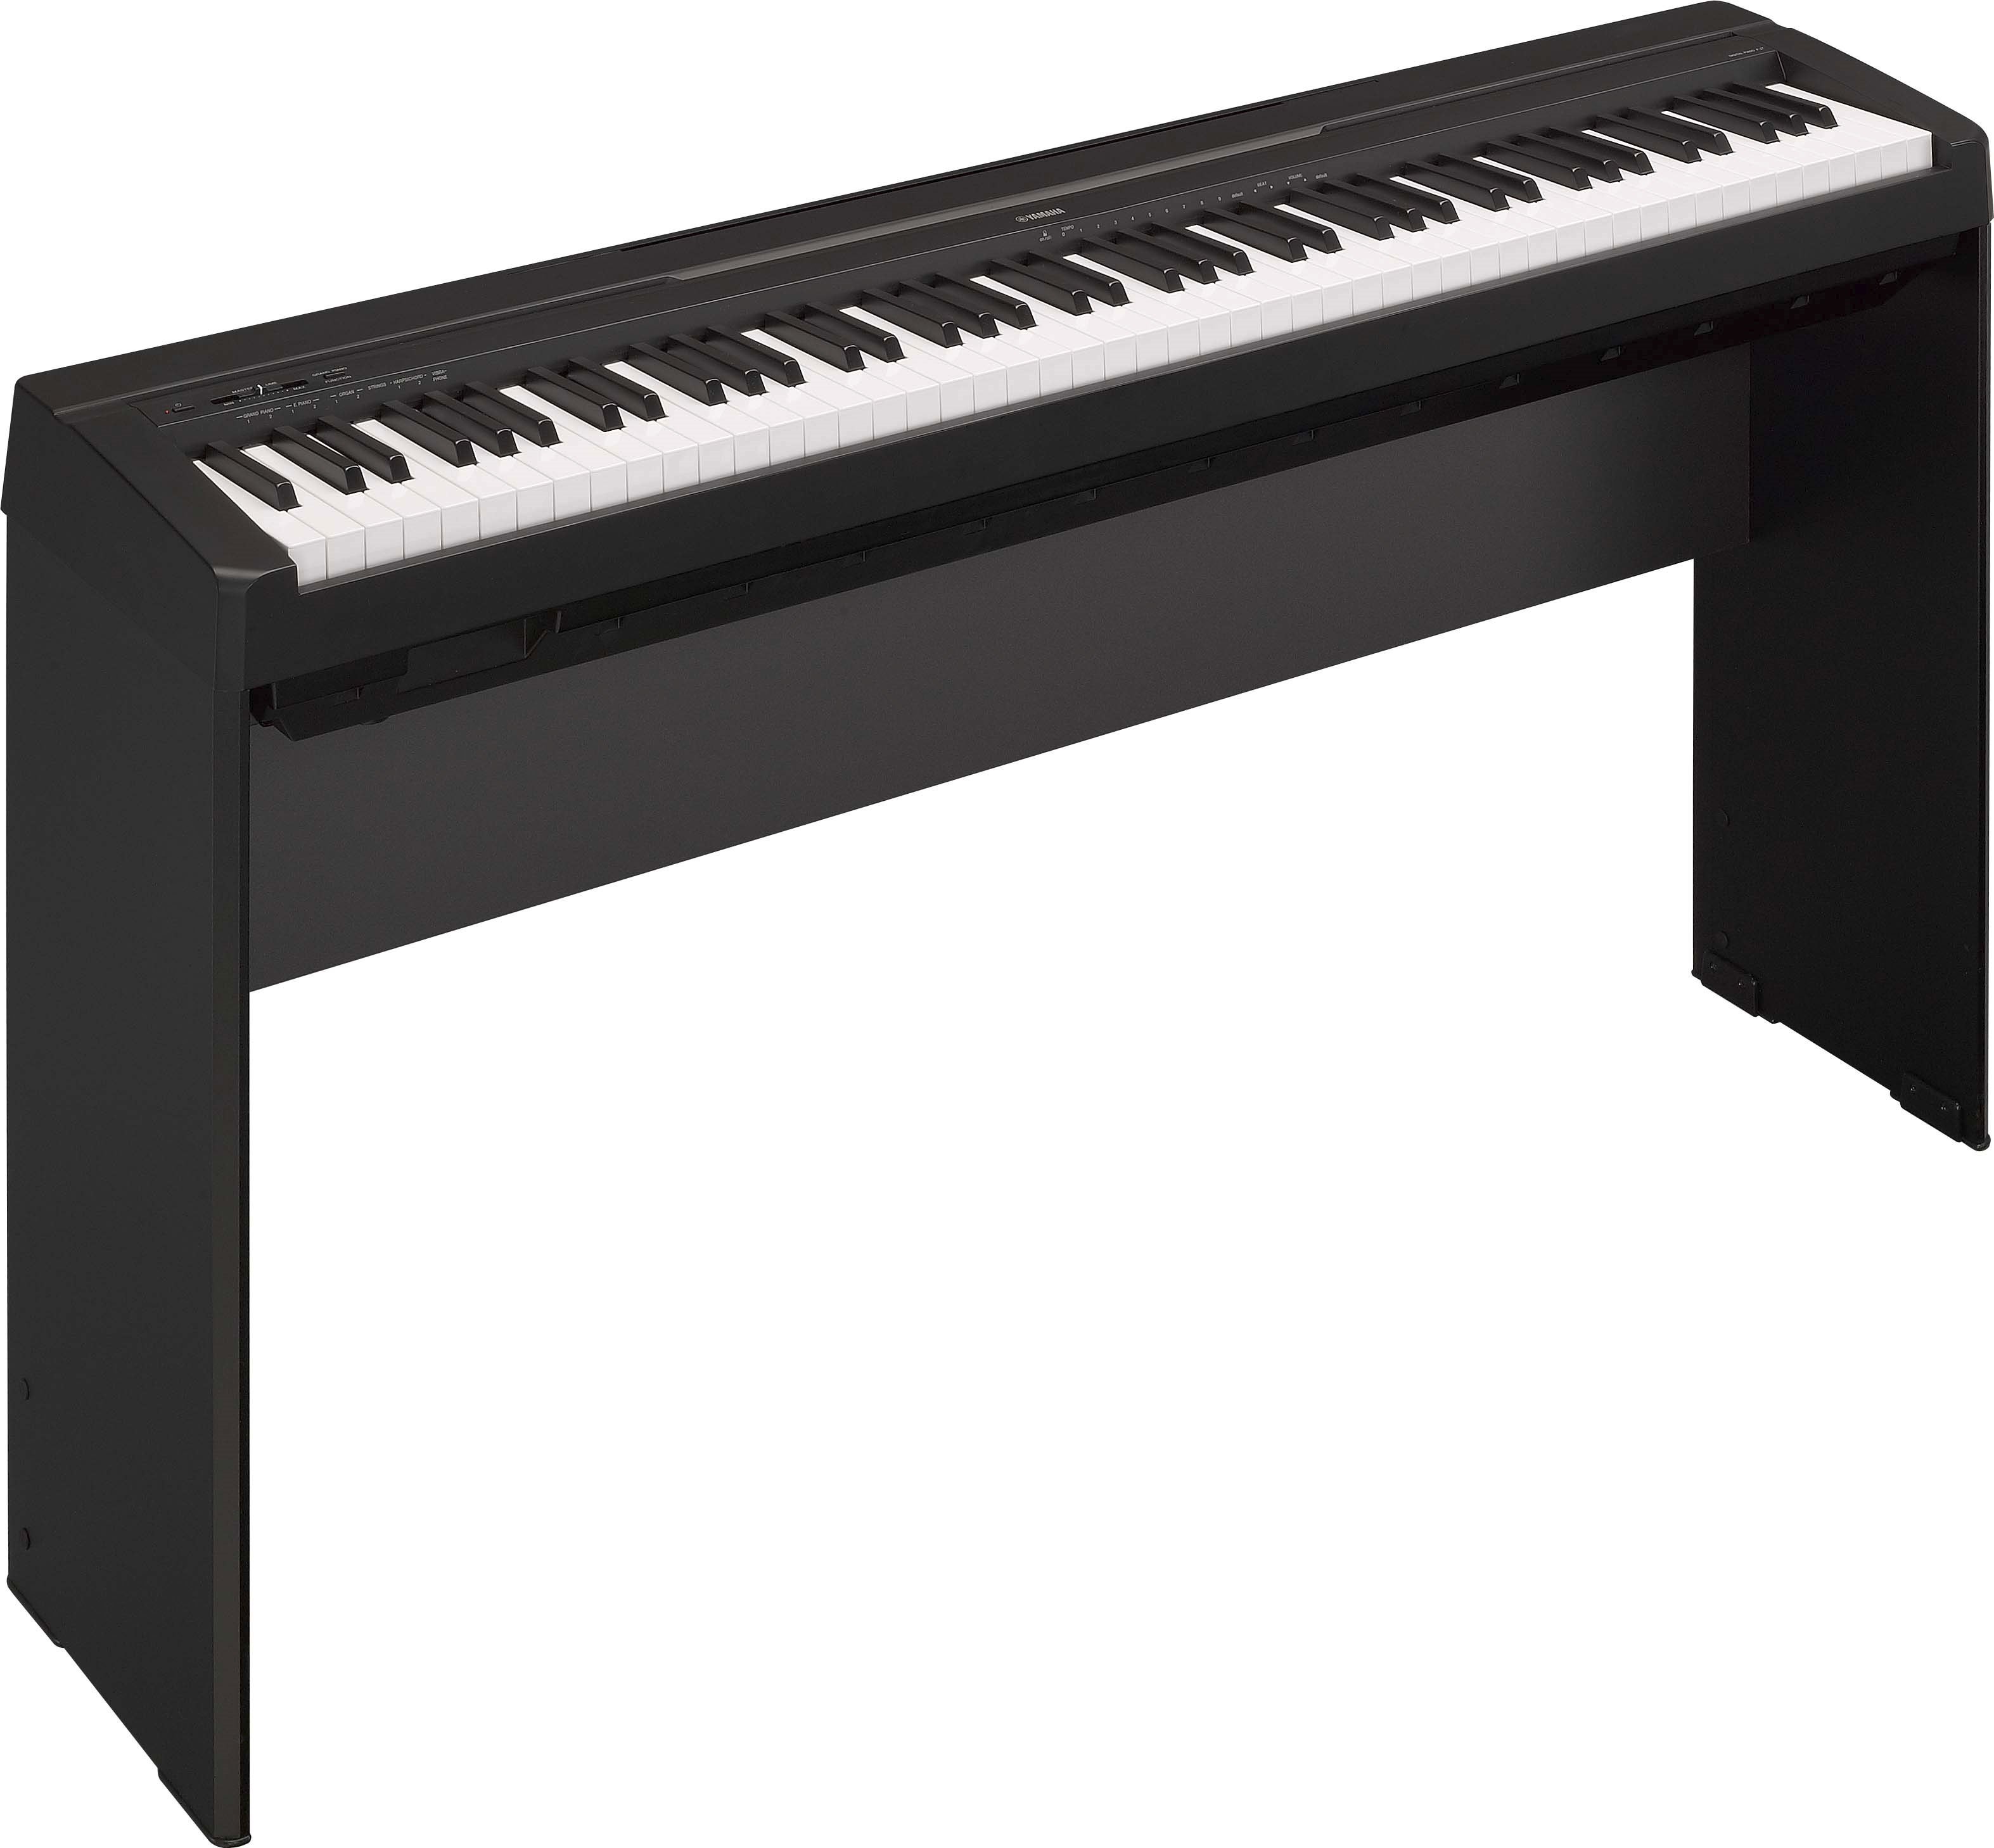 P-35 - Overview - P Series - Pianos - Musical Instruments 